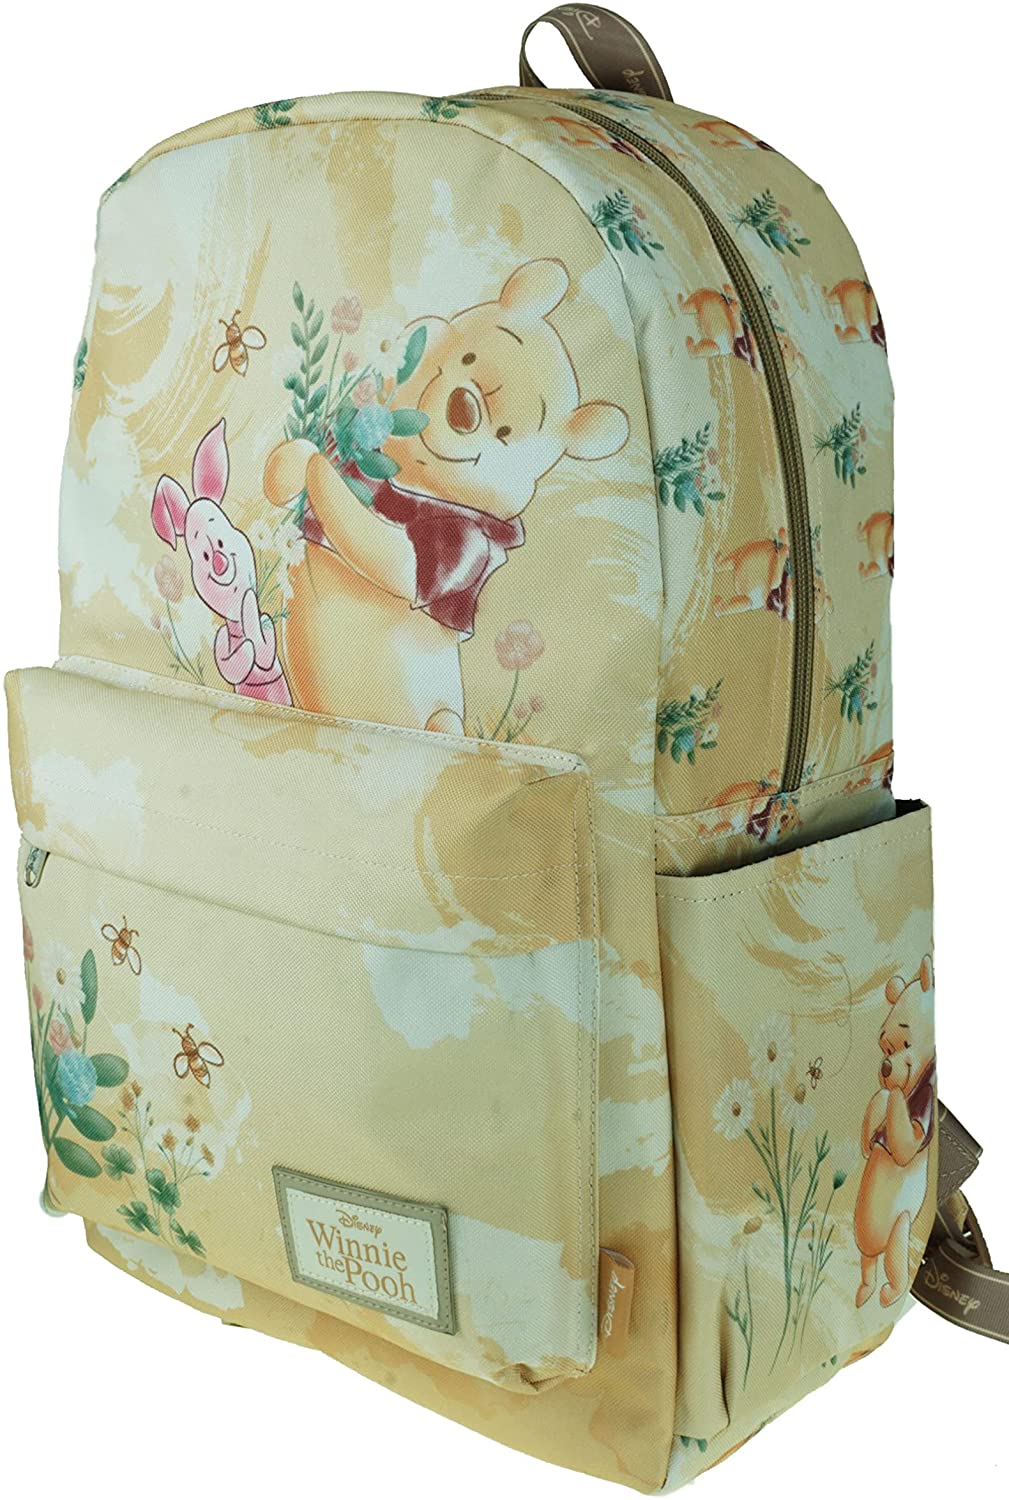 Classic Disney Winnie The Pooh Backpack with Laptop Compartment for School - GTE Zone